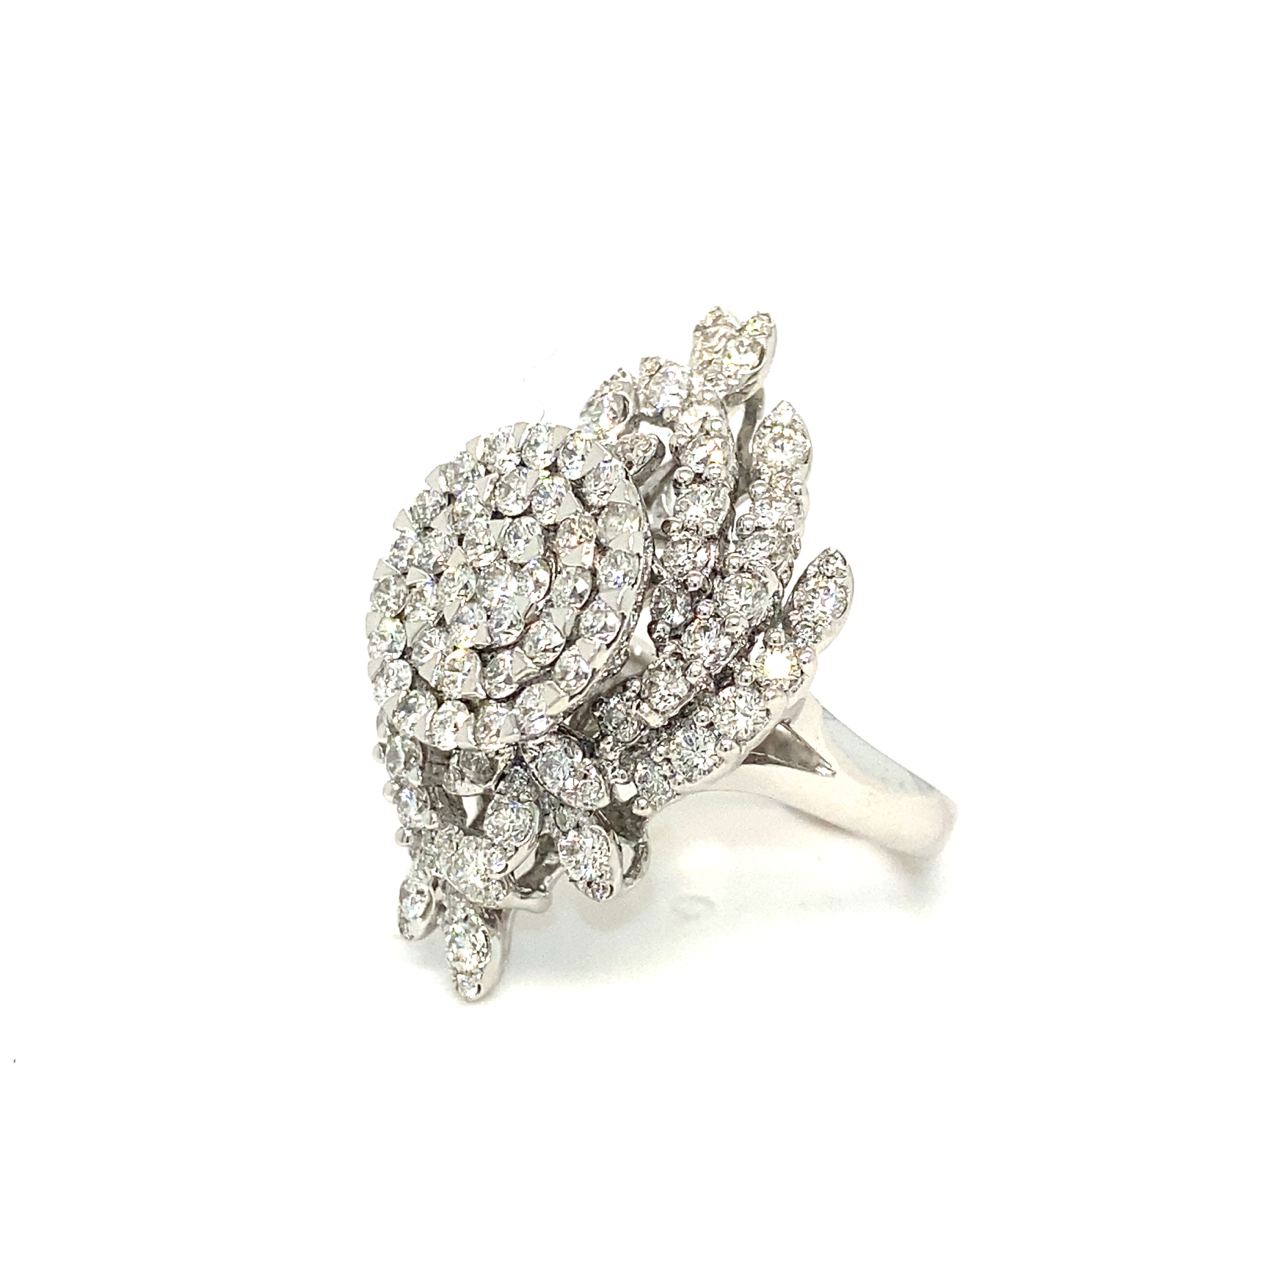 18K White Gold Ever Leave Lotus Cluster Top Diamond Ring